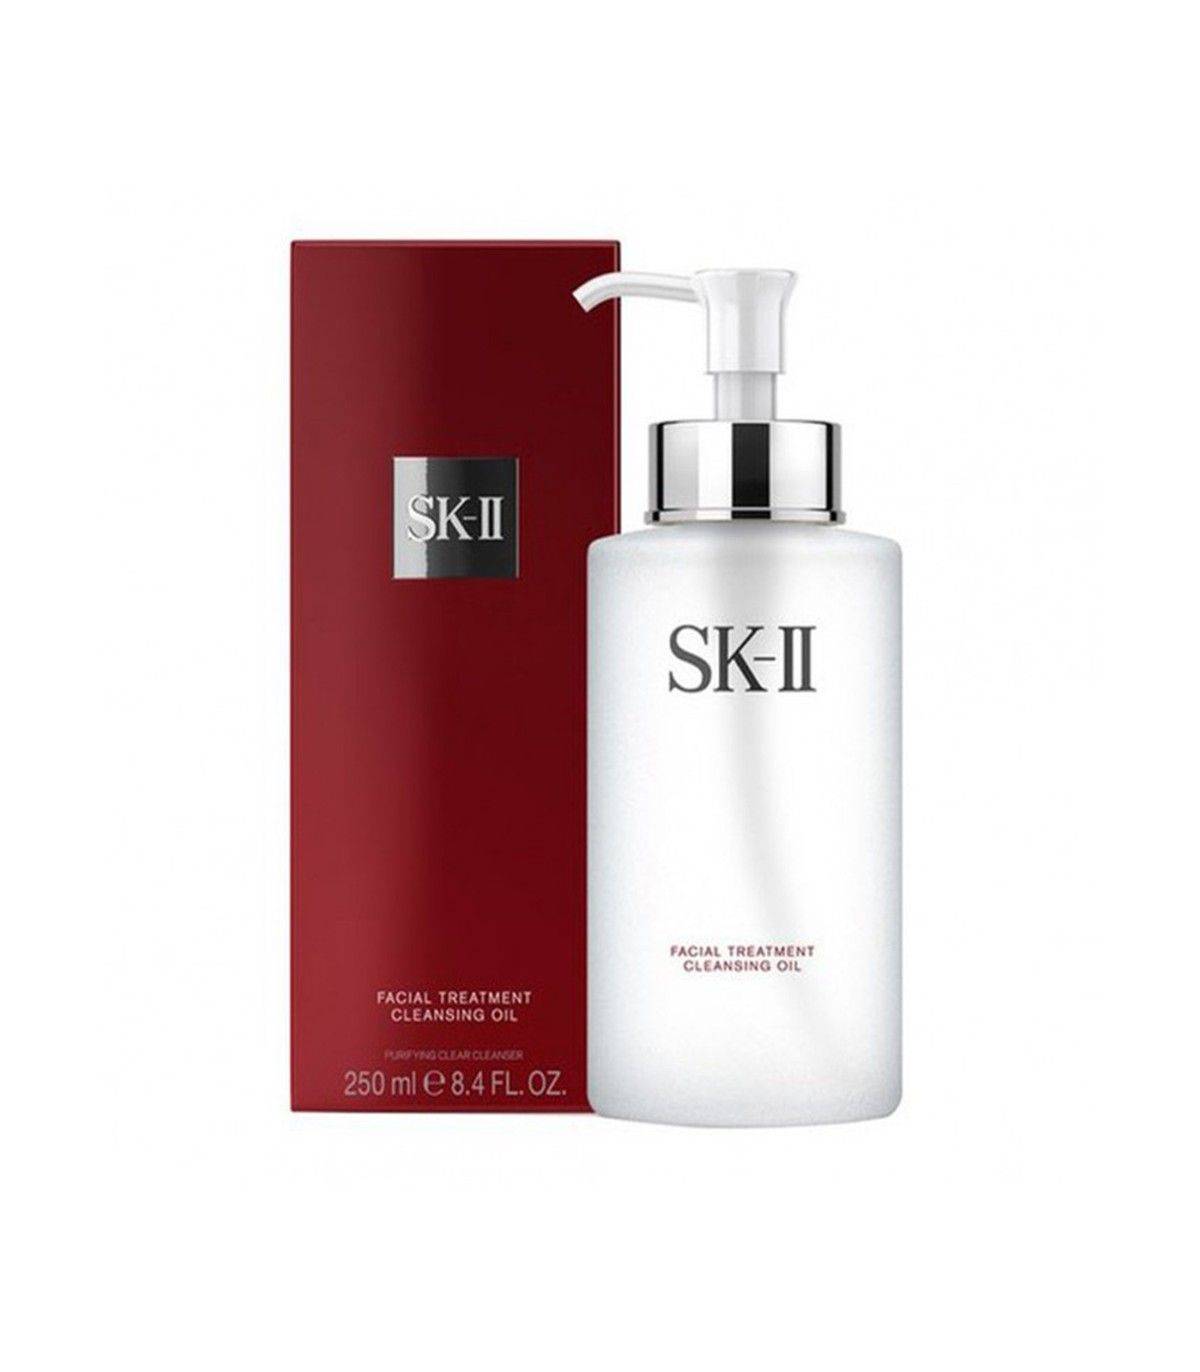 SK-II Facial Treatment Cleansing Oil(250ml) - Best Buy World Singapore